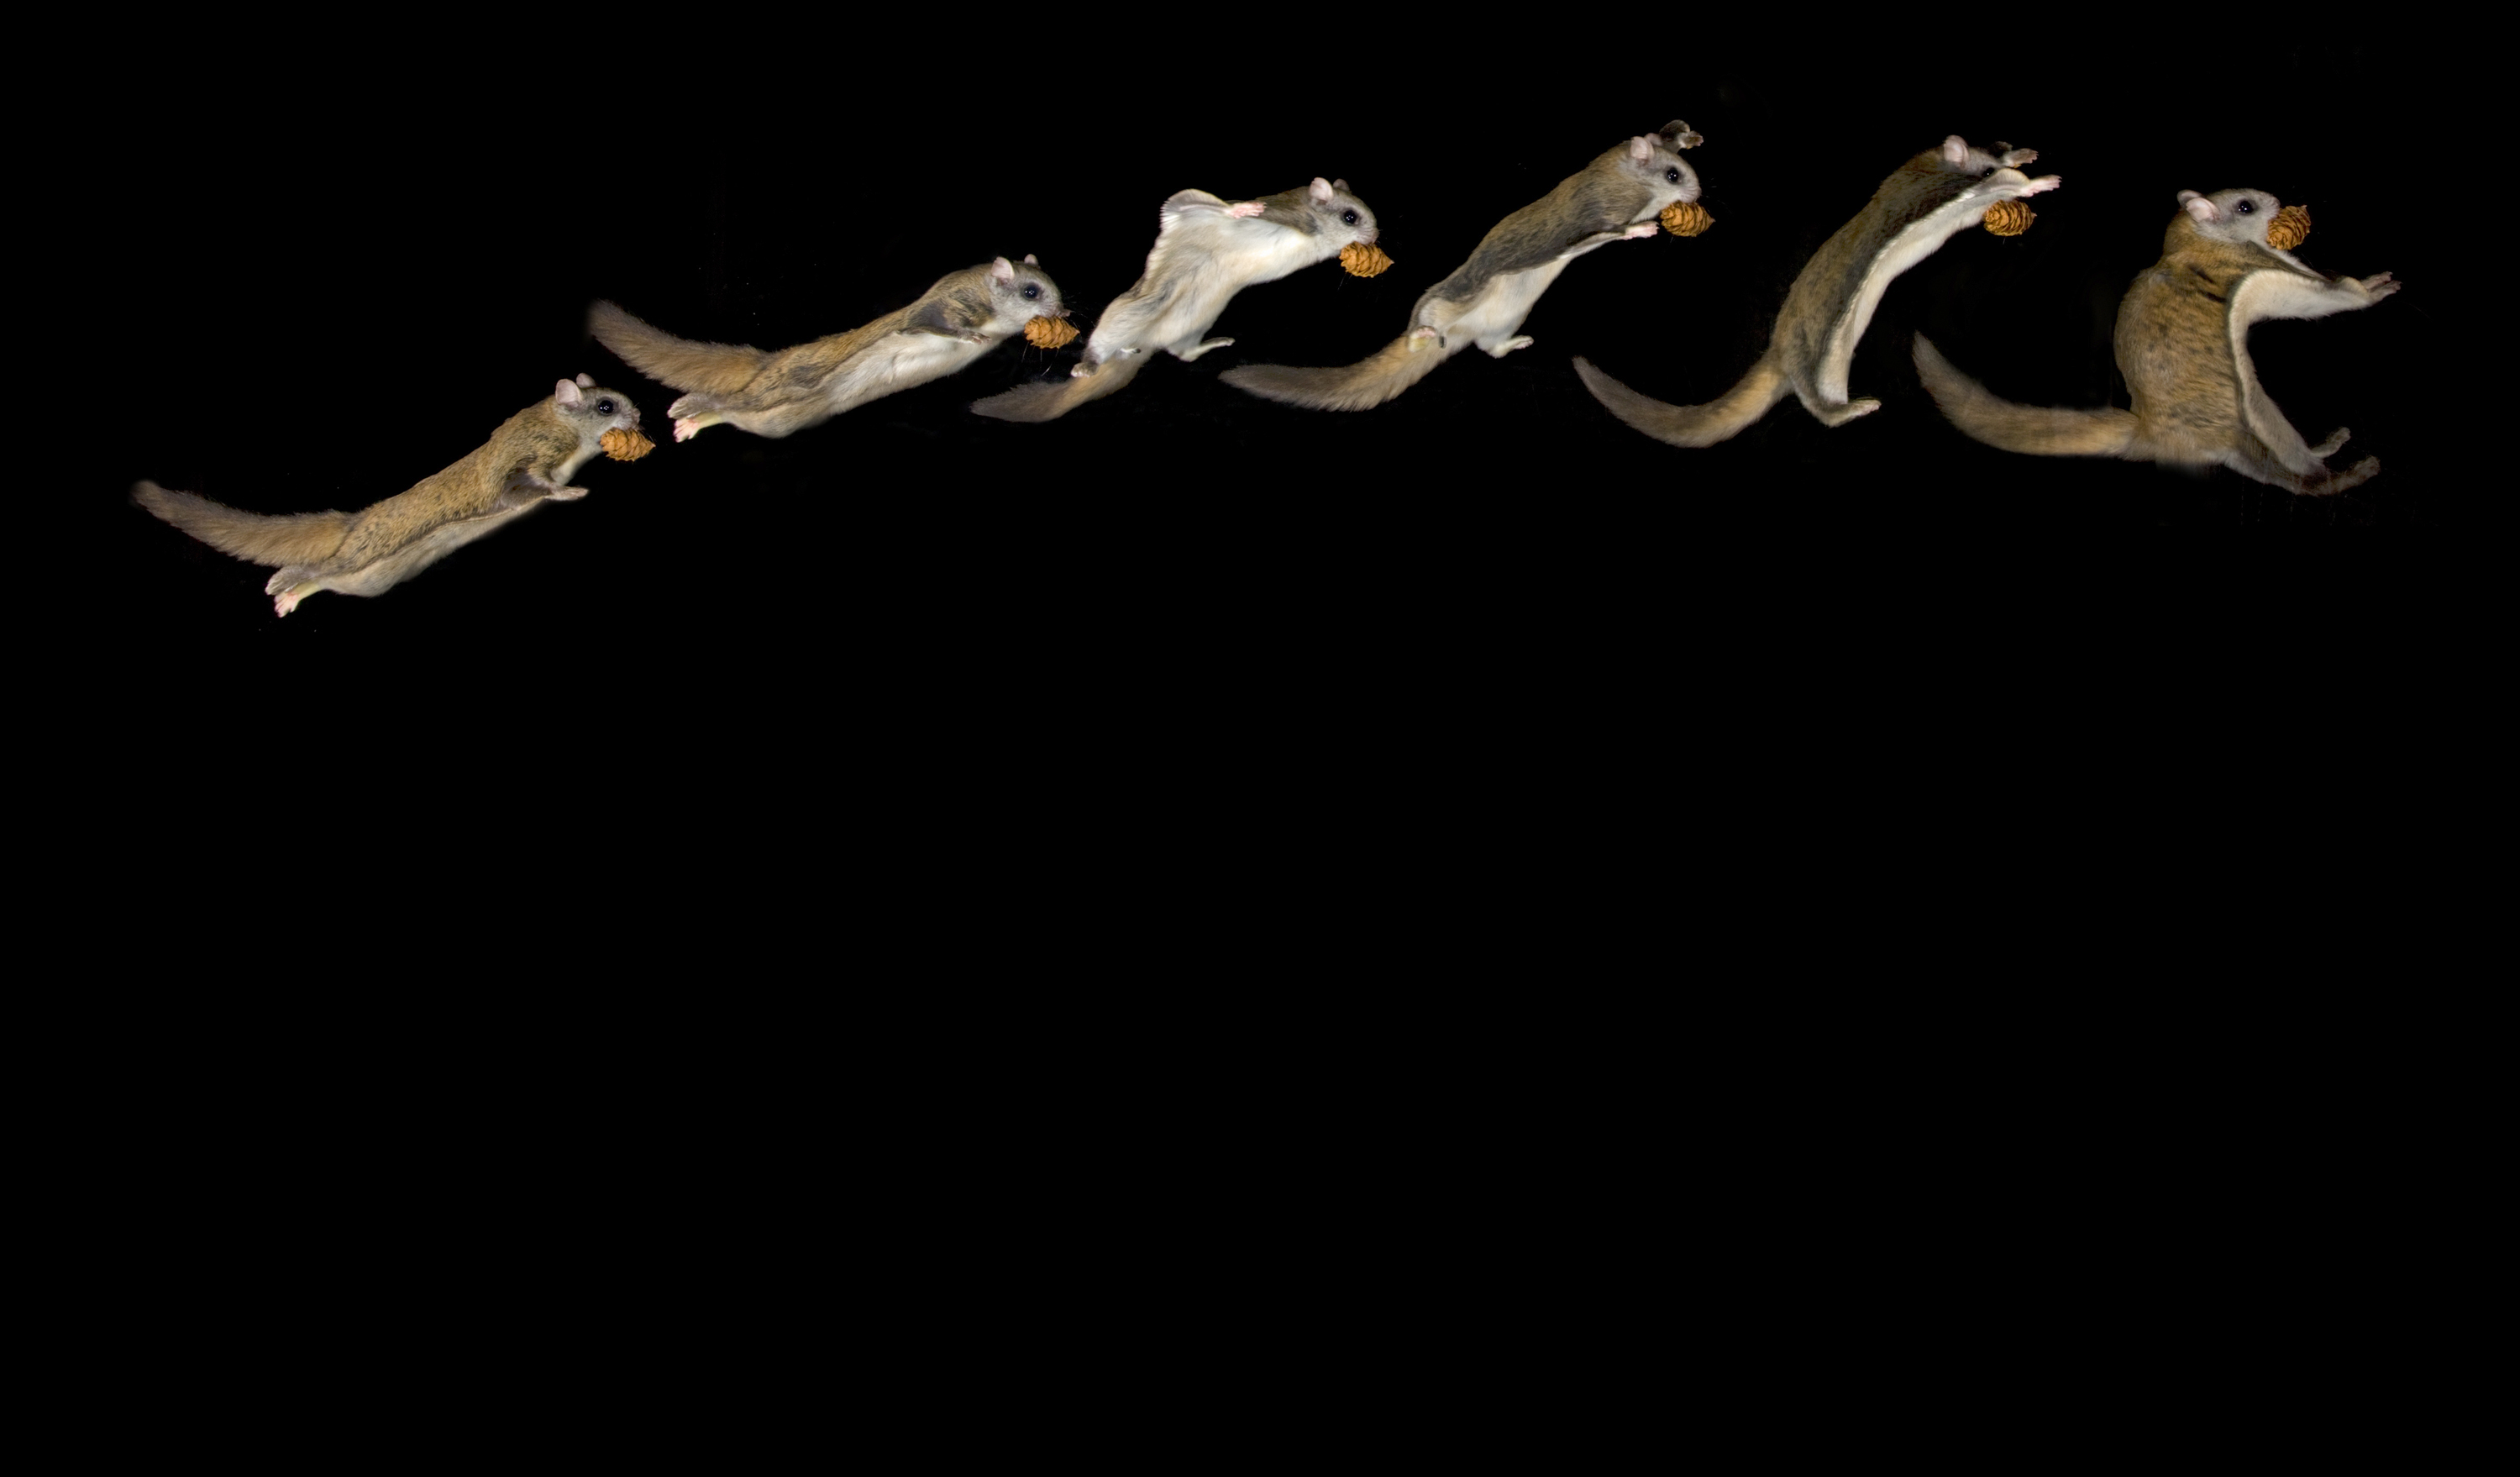 Alexander Badyaev, a University of Arizona professor of evolutionary biology who regularly conducts northern flying squirrel research in the forests of Montana, photographed this squirrel gaining altitude.